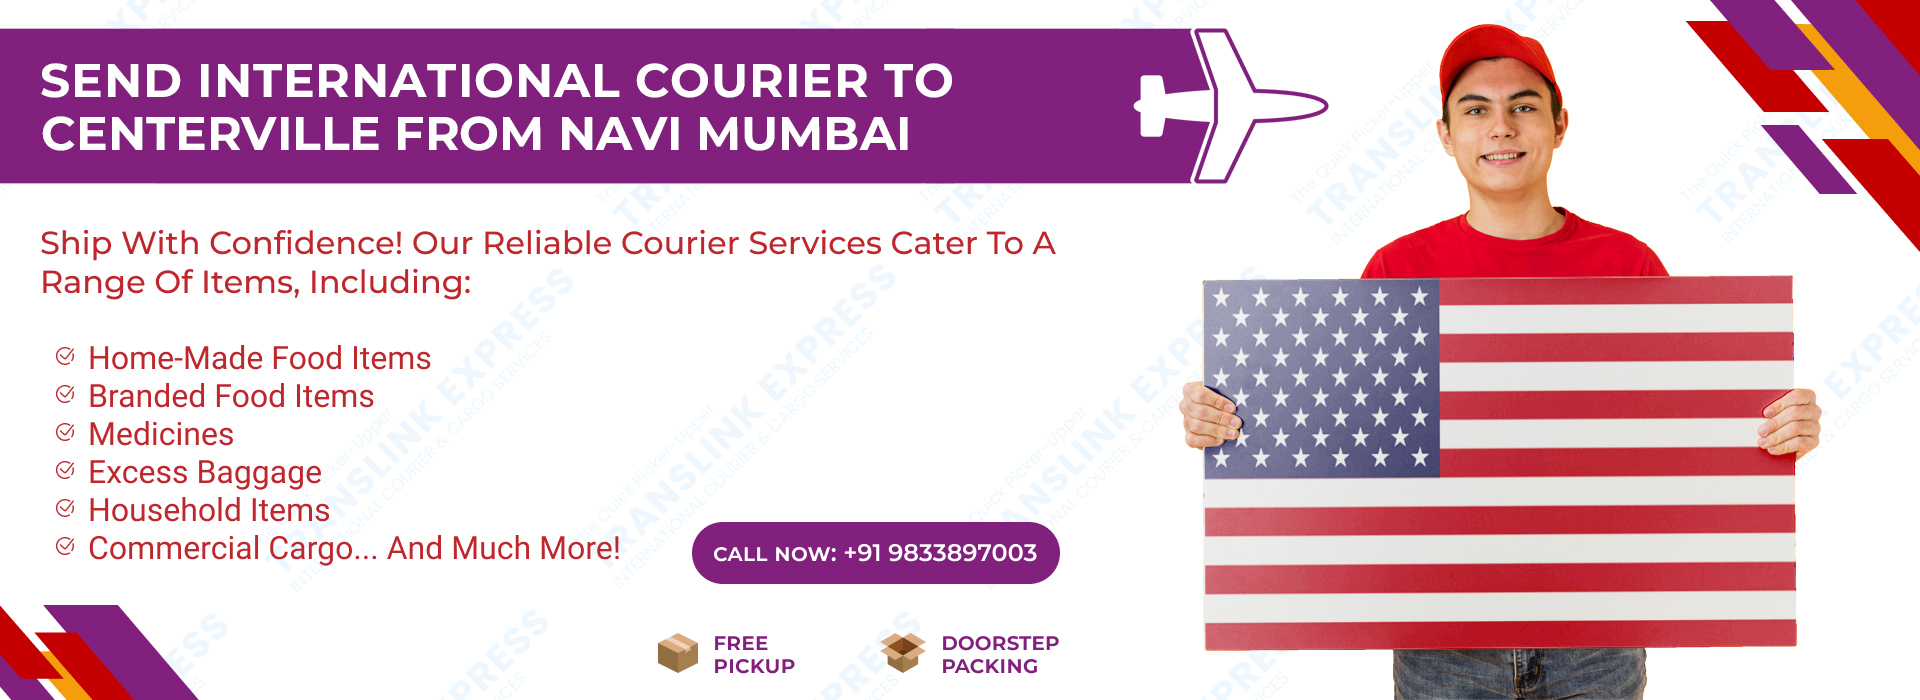 Courier to Centerville From Navi Mumbai